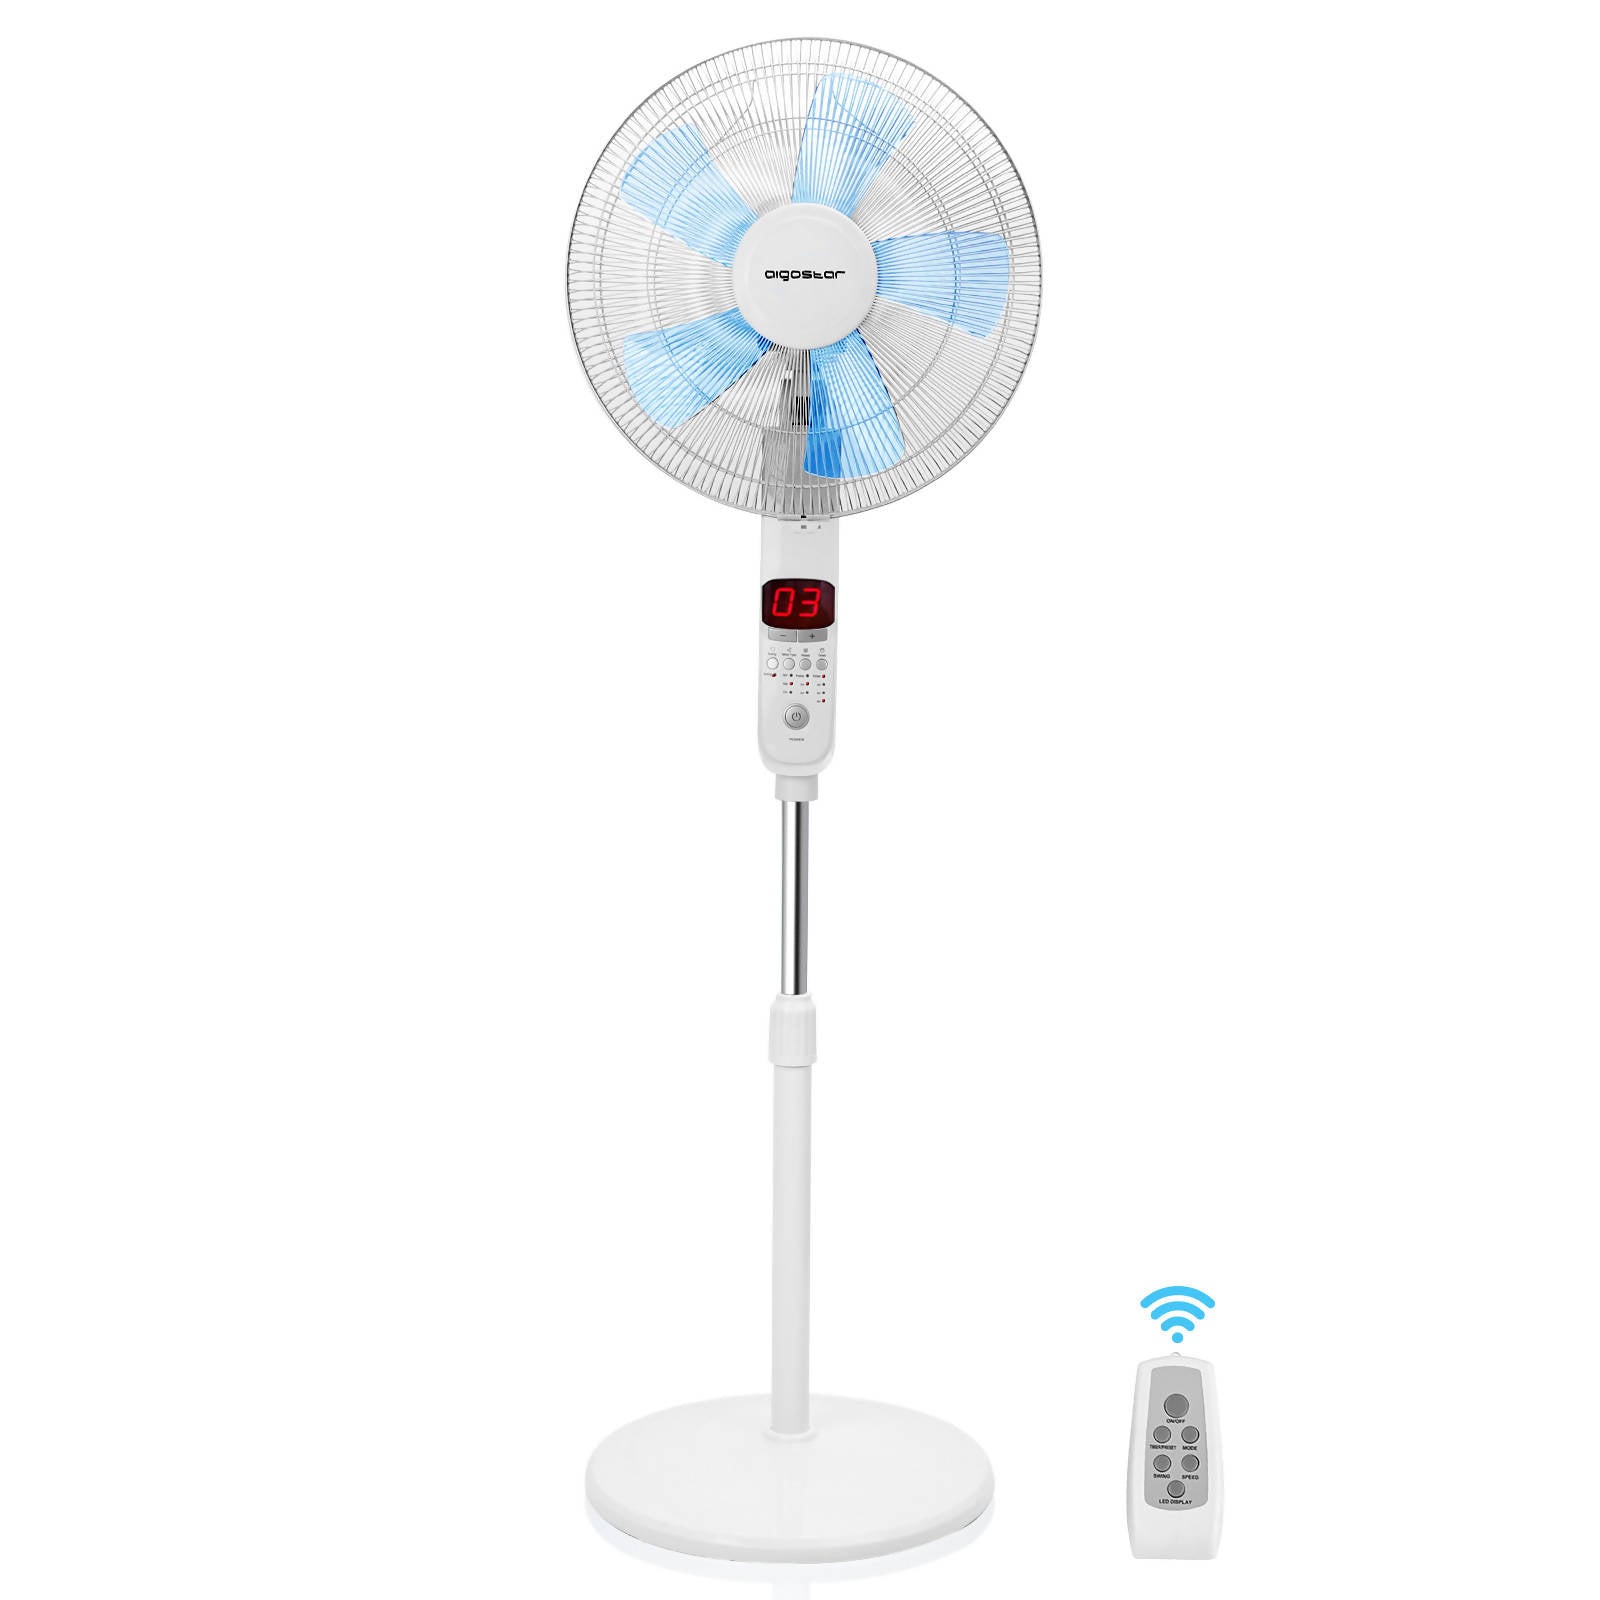 Aigostar Ocean Floor Fan with Remote Control and LED Display, 50 W, Quiet, 3 Speed Levels, 24 H Timer, Fan Height Adjustable, 85° Oscillation Floor Fan, White